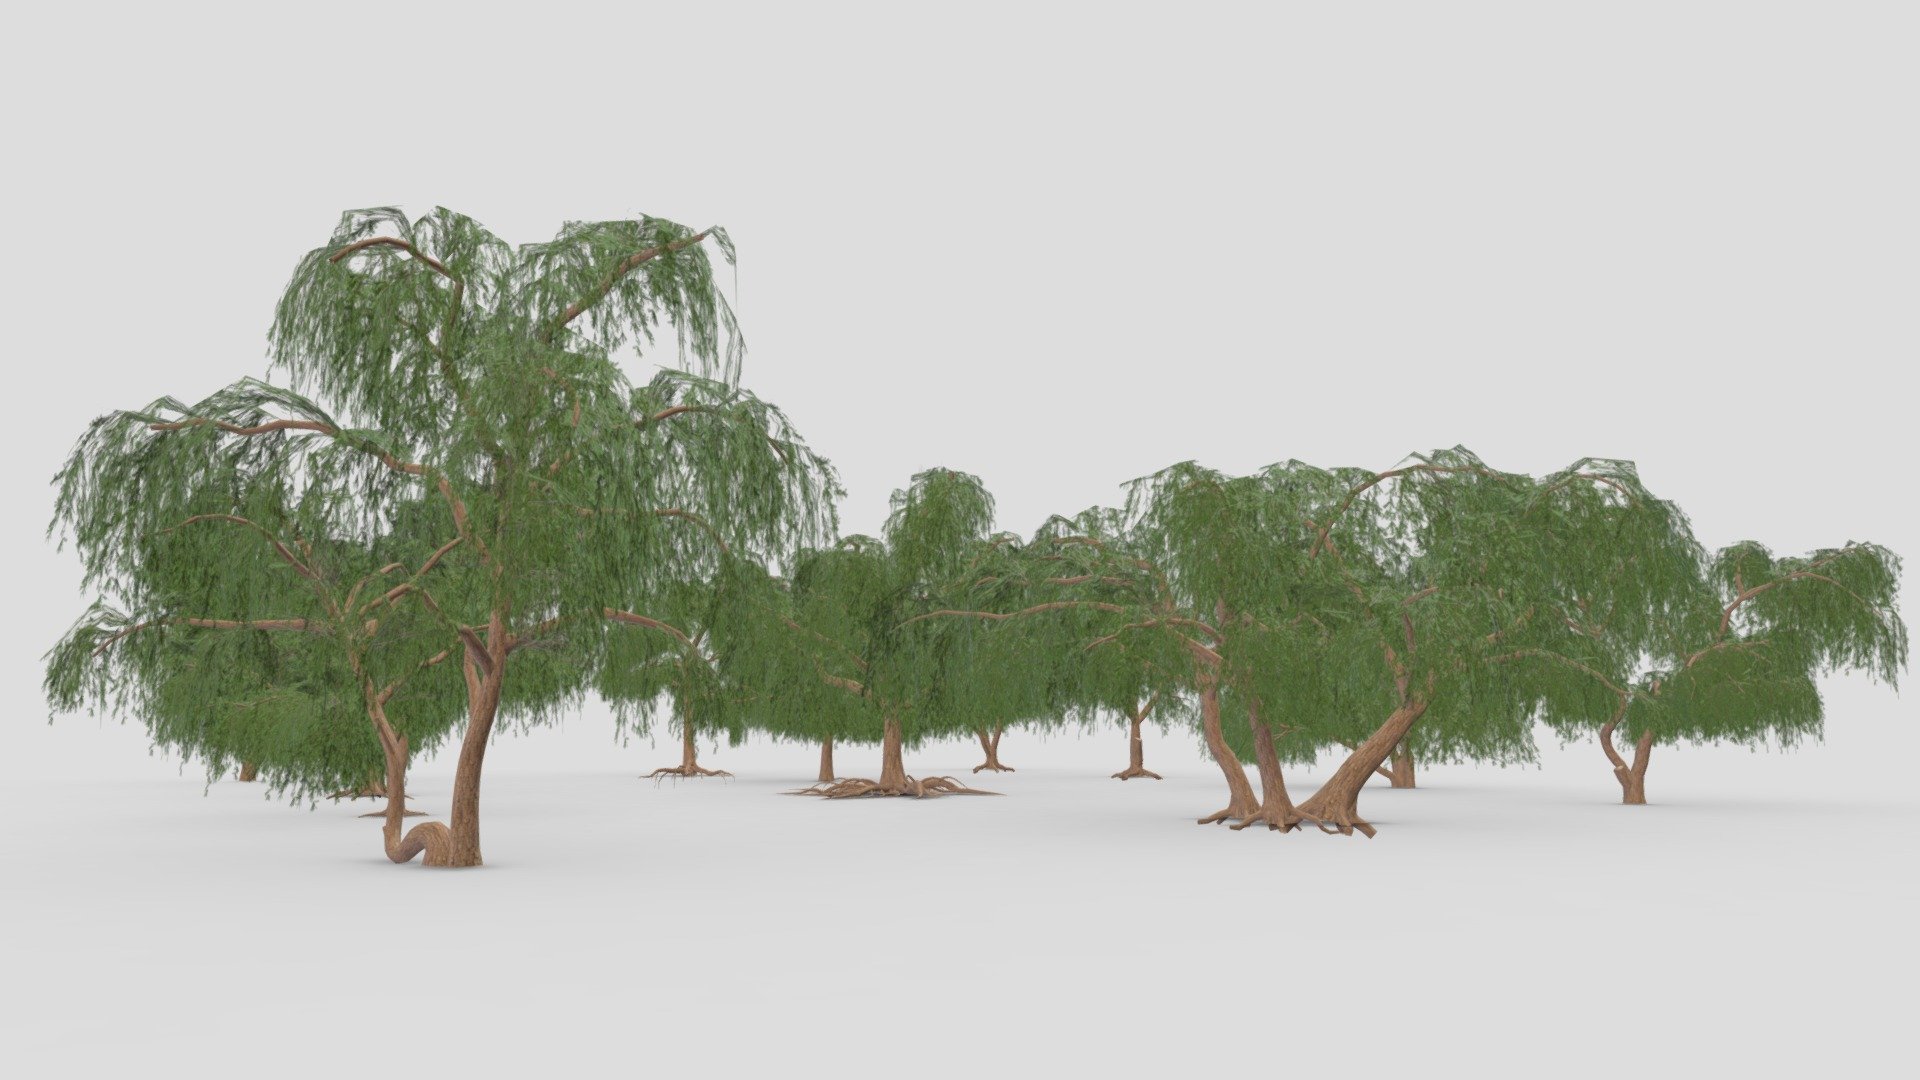 This is a low poly 3D Model collection of the Prosopis tree. This collection contains 12 3D Models of the Prosopis tree. I tried to provide you a low poly collection of the Prosopis Tree, you can use that in your projects 3d model